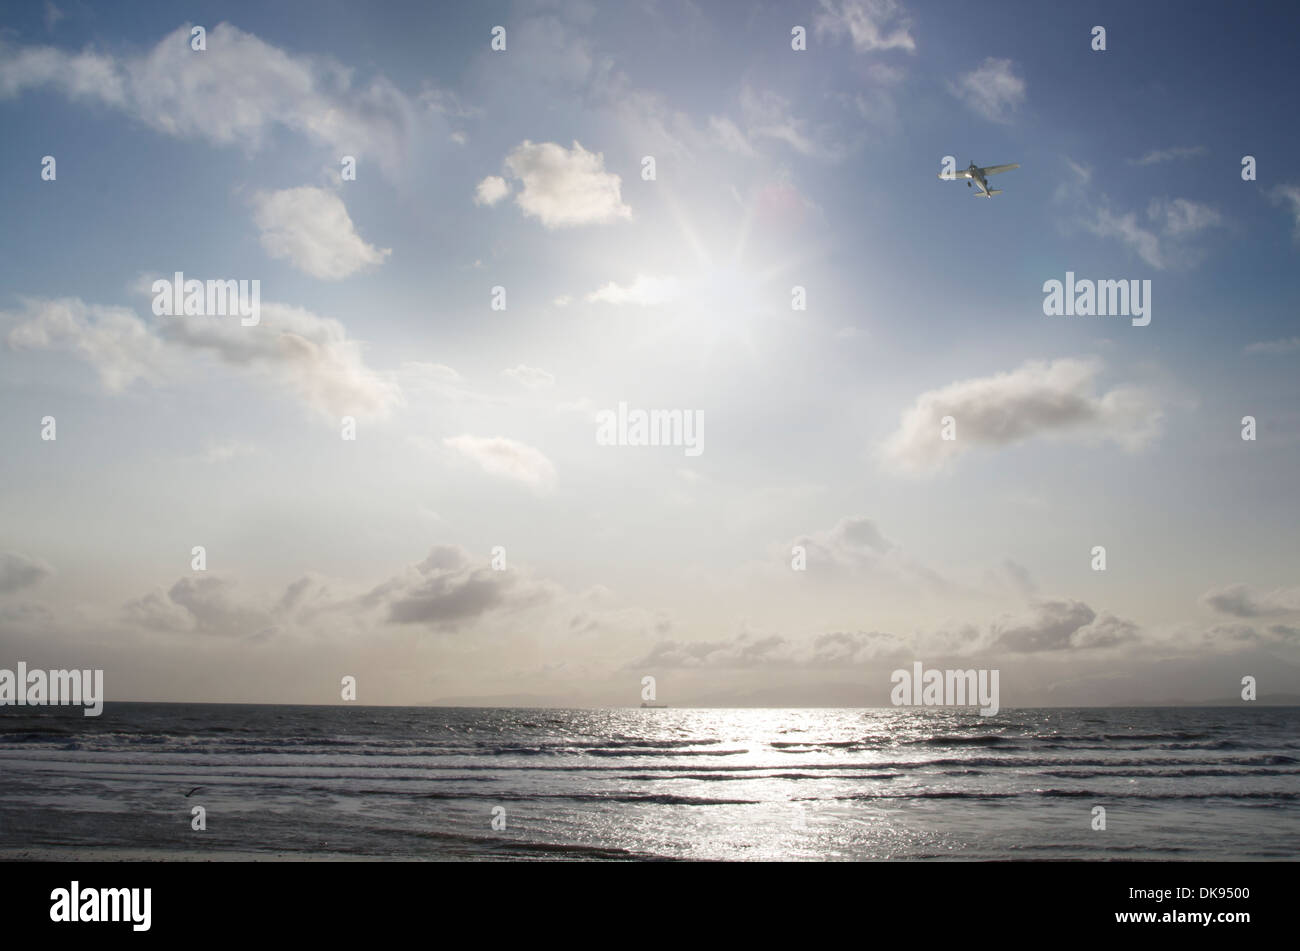 Small airplane flying over the ocean with a sunburst and clouds. Stock Photo